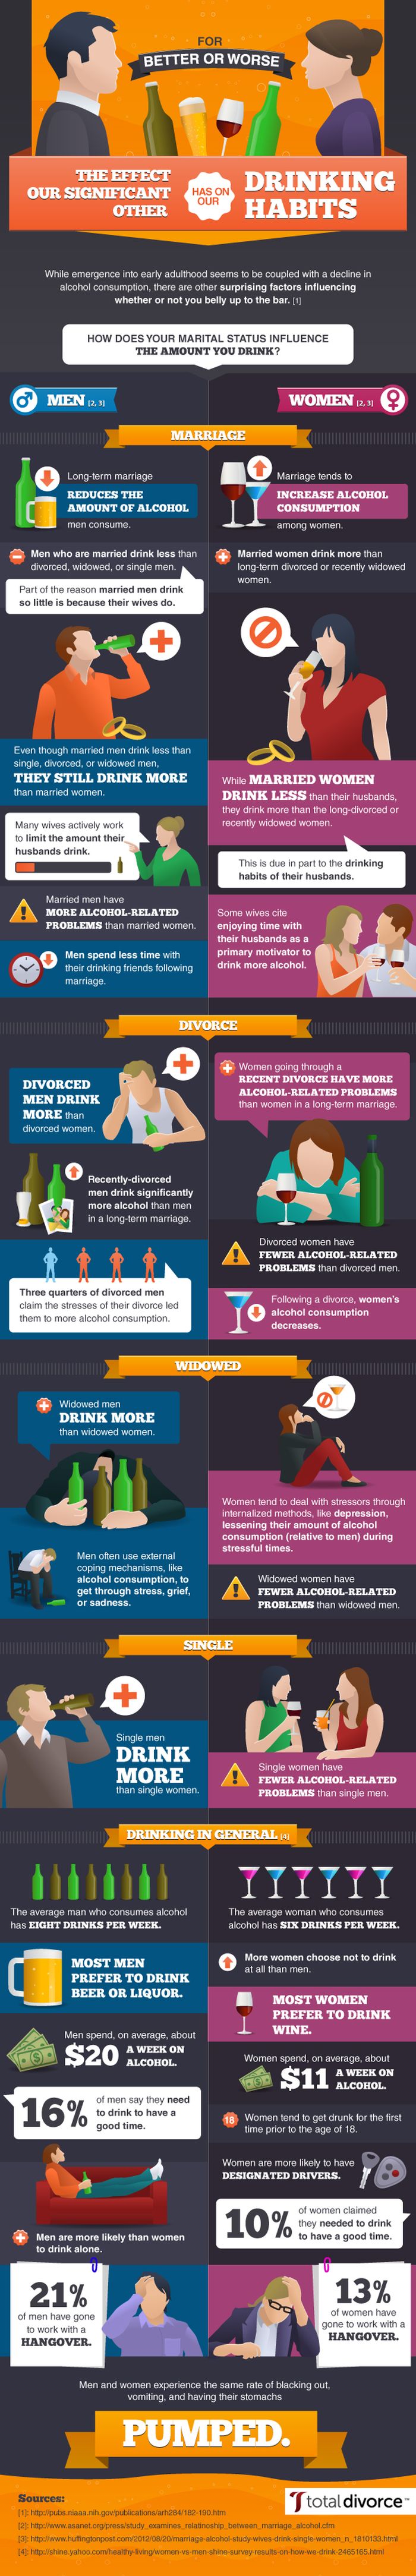 How Your Relationship Status Effects Your Drinking Habits (infographic)